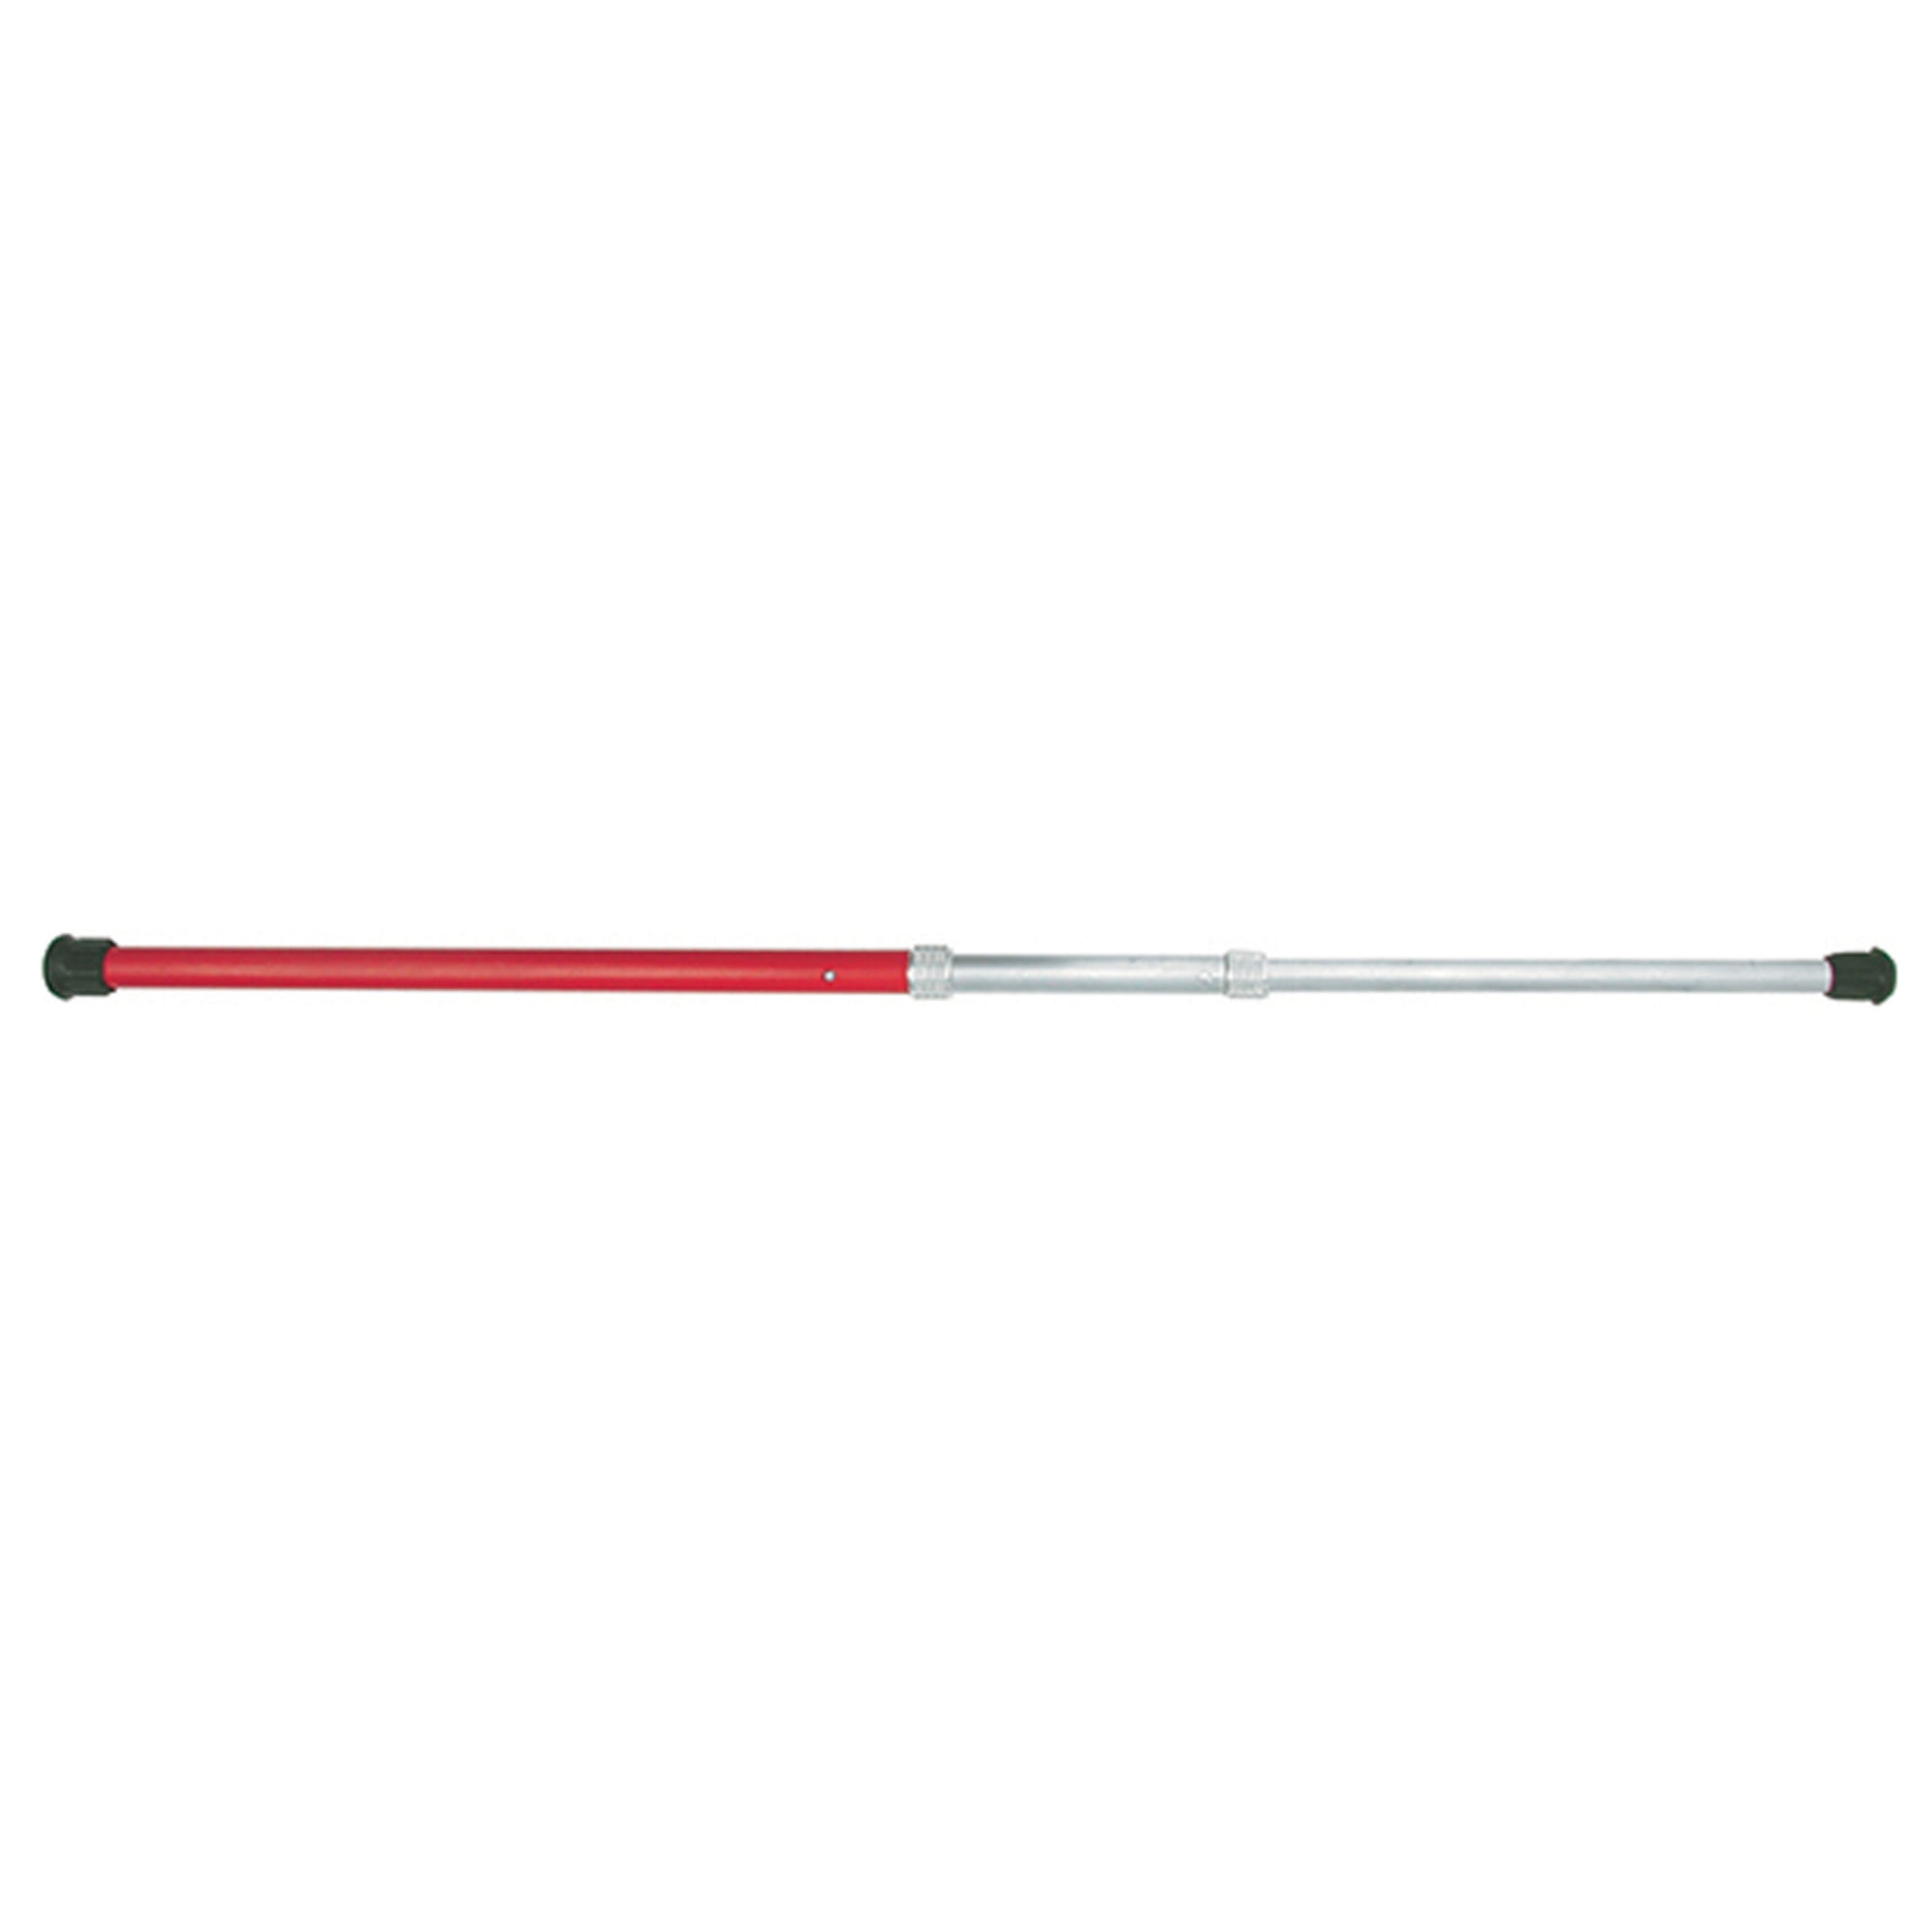 Steelman Universal Telescoping Hood Prop and Safety Support Rod 301111